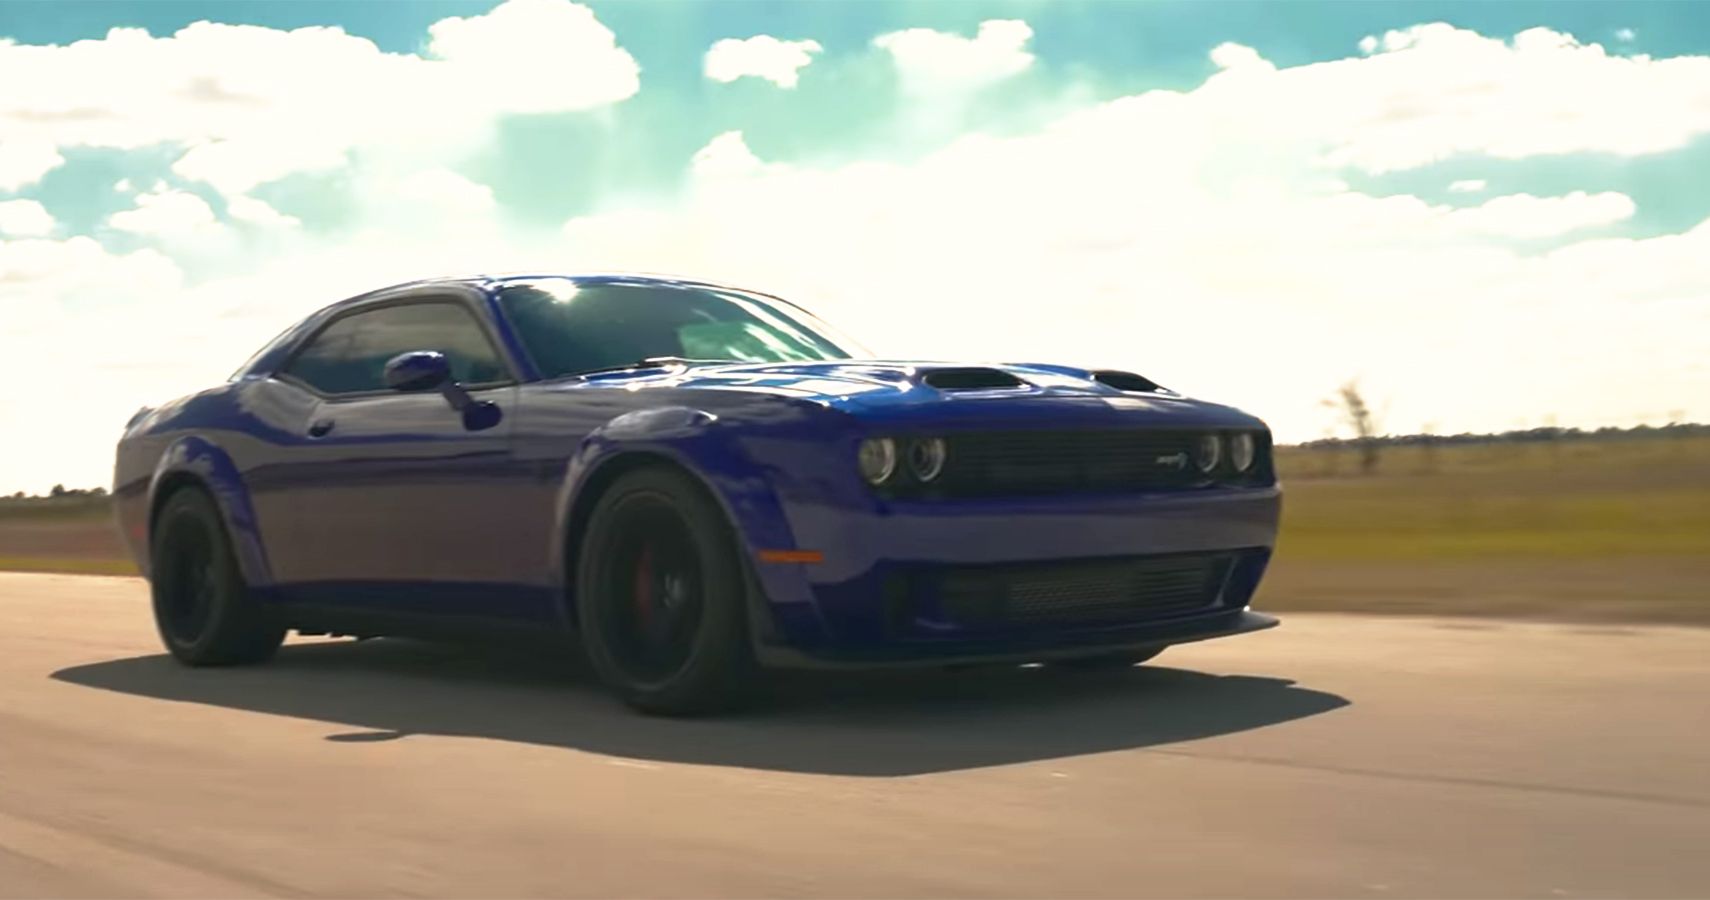 This 1,000HP Dodge SRT Challenger Hellcat Redeye Dominates With Its